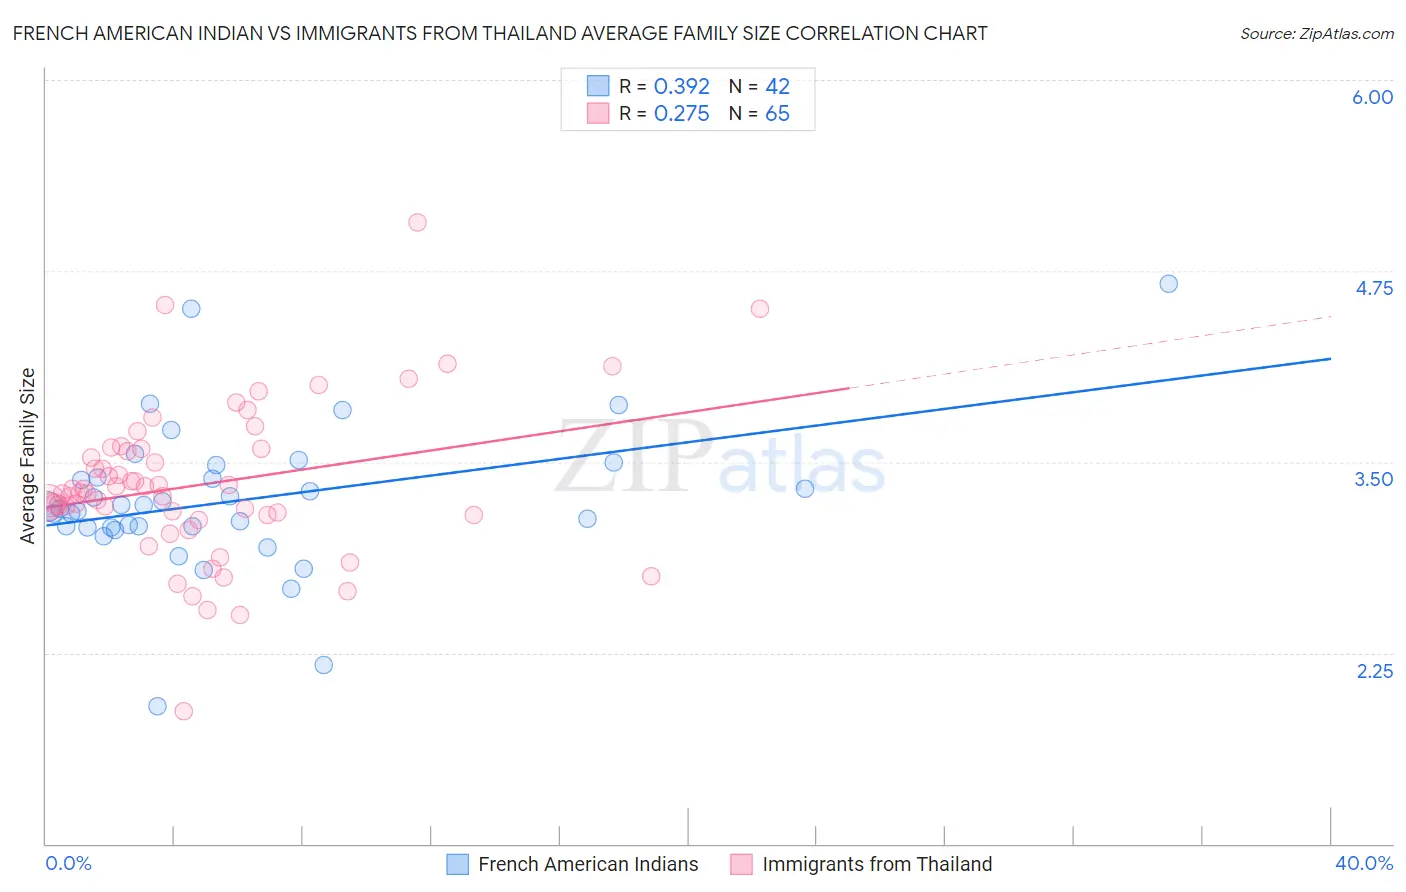 French American Indian vs Immigrants from Thailand Average Family Size